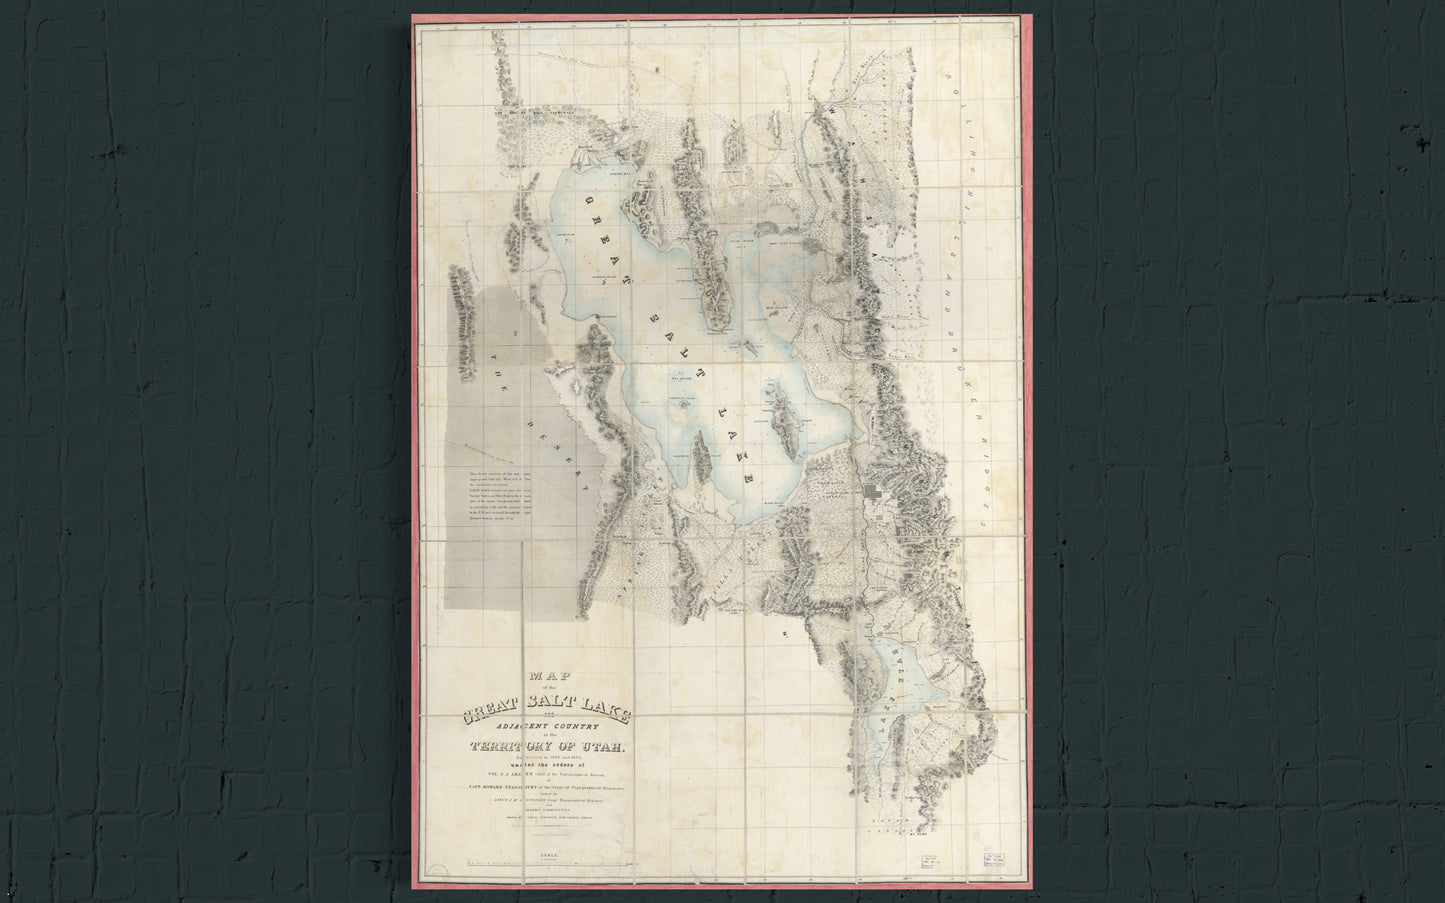 Stansbury's 1850 Map of the Great Salt Lake